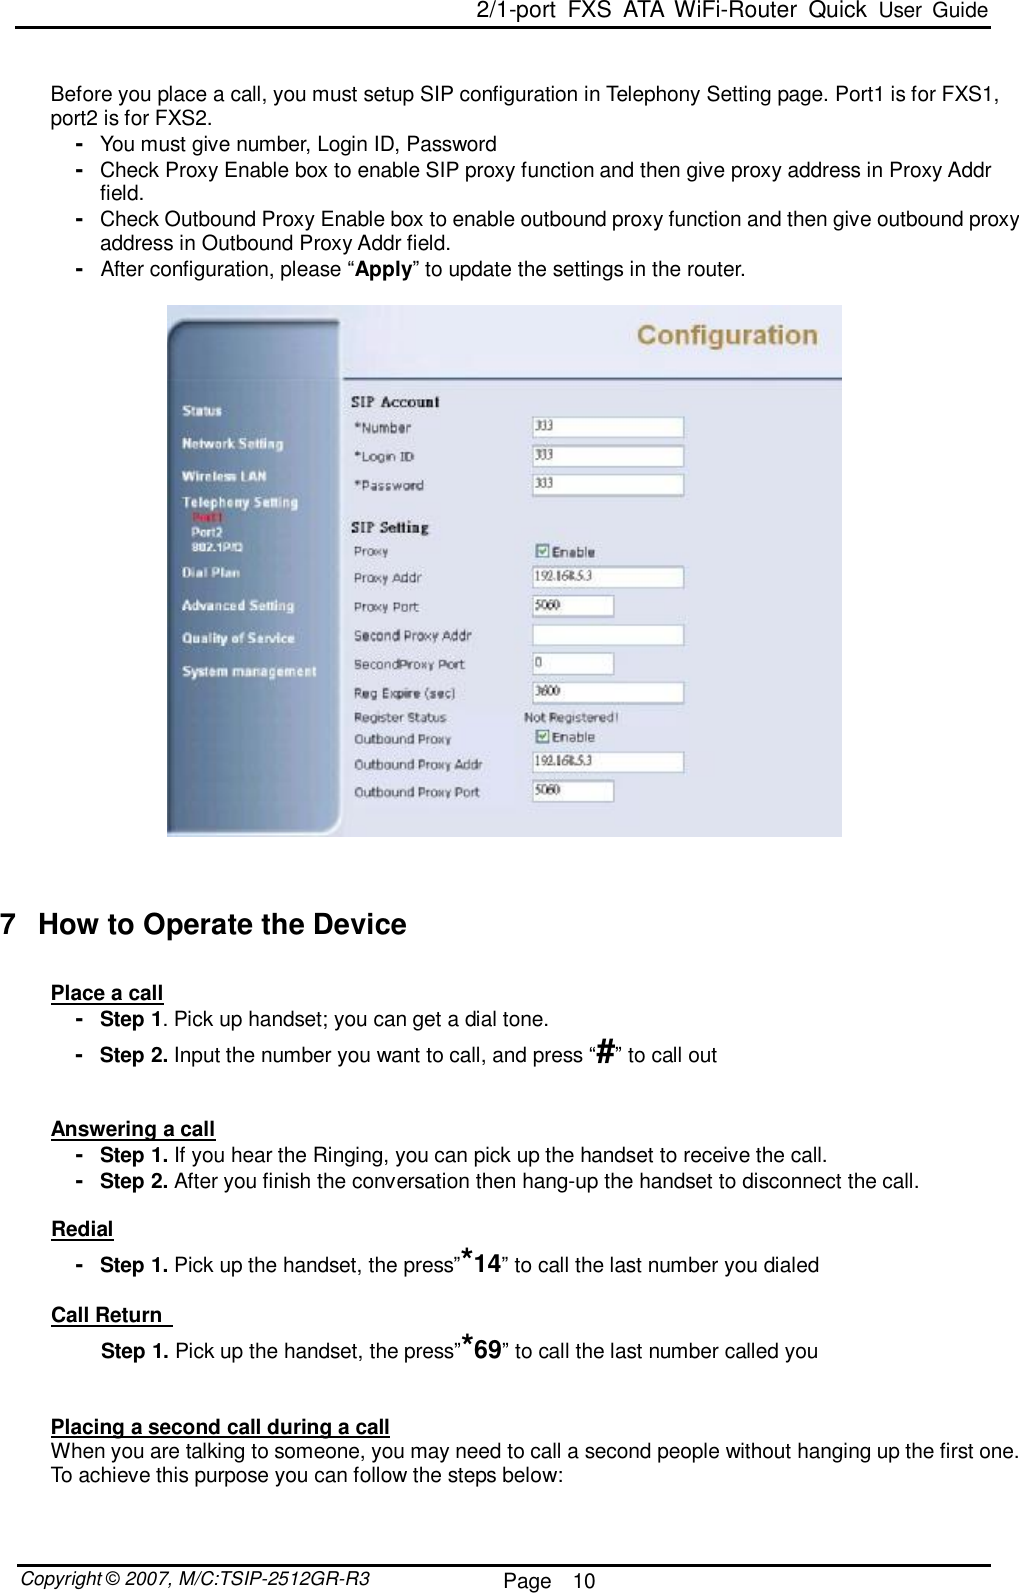  2/1-port FXS ATA WiFi-Router Quick User Guide  Copyright © 2007, M/C:TSIP-2512GR-R3  Page  10      Before you place a call, you must setup SIP configuration in Telephony Setting page. Port1 is for FXS1, port2 is for FXS2.  -  You must give number, Login ID, Password -  Check Proxy Enable box to enable SIP proxy function and then give proxy address in Proxy Addr field.  -  Check Outbound Proxy Enable box to enable outbound proxy function and then give outbound proxy address in Outbound Proxy Addr field.  -  After configuration, please “Apply” to update the settings in the router.      7 How to Operate the Device  Place a call -  Step 1. Pick up handset; you can get a dial tone.       -  Step 2. Input the number you want to call, and press “#” to call out   Answering a call -  Step 1. If you hear the Ringing, you can pick up the handset to receive the call. -  Step 2. After you finish the conversation then hang-up the handset to disconnect the call.              Redial -  Step 1. Pick up the handset, the press”*14” to call the last number you dialed        Call Return          Step 1. Pick up the handset, the press”*69” to call the last number called you   Placing a second call during a call When you are talking to someone, you may need to call a second people without hanging up the first one. To achieve this purpose you can follow the steps below: 